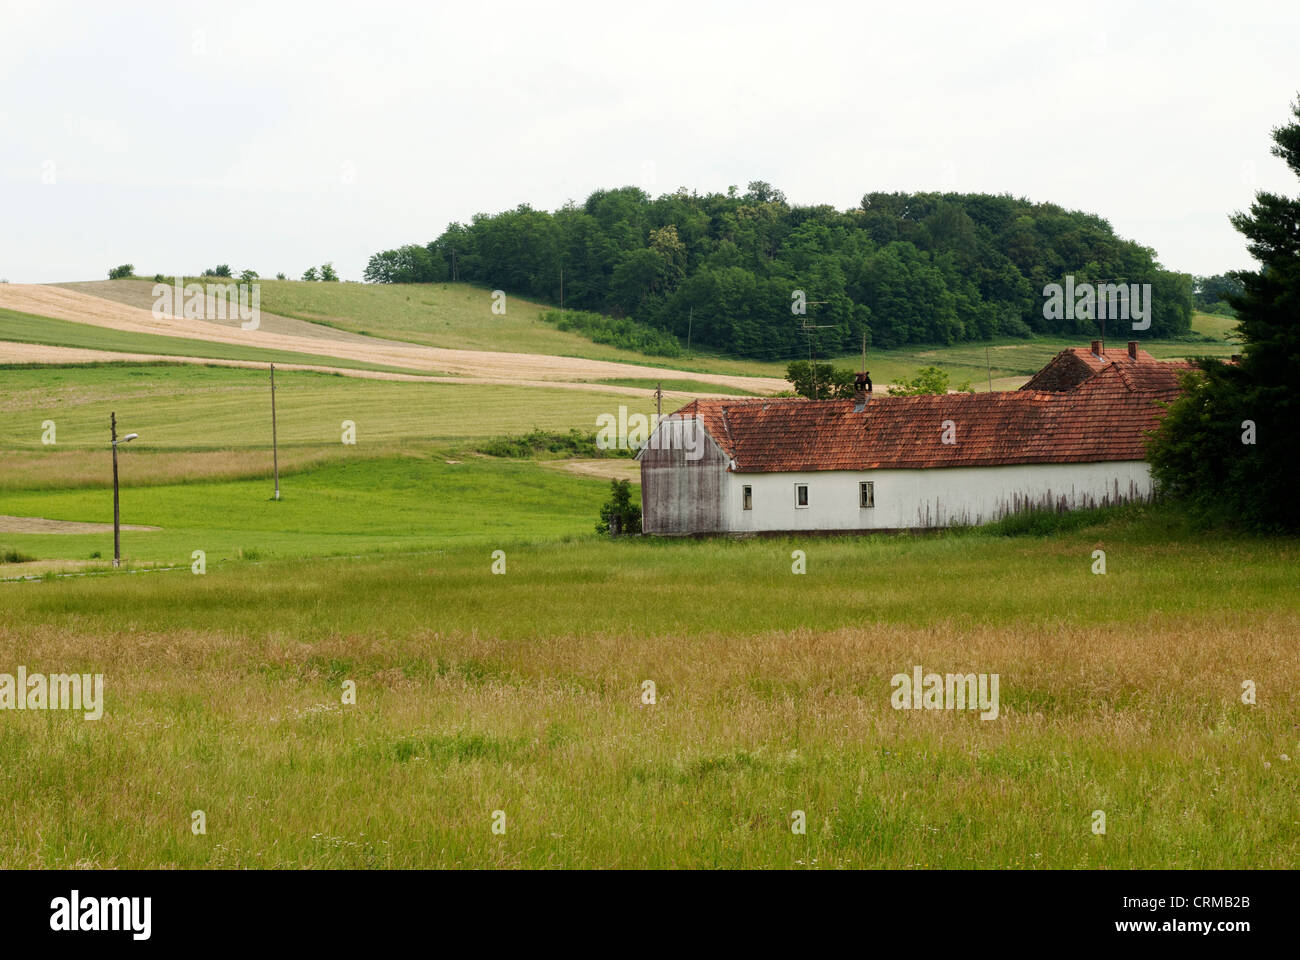 Landscape with country house, central Croatia, Europe Stock Photo